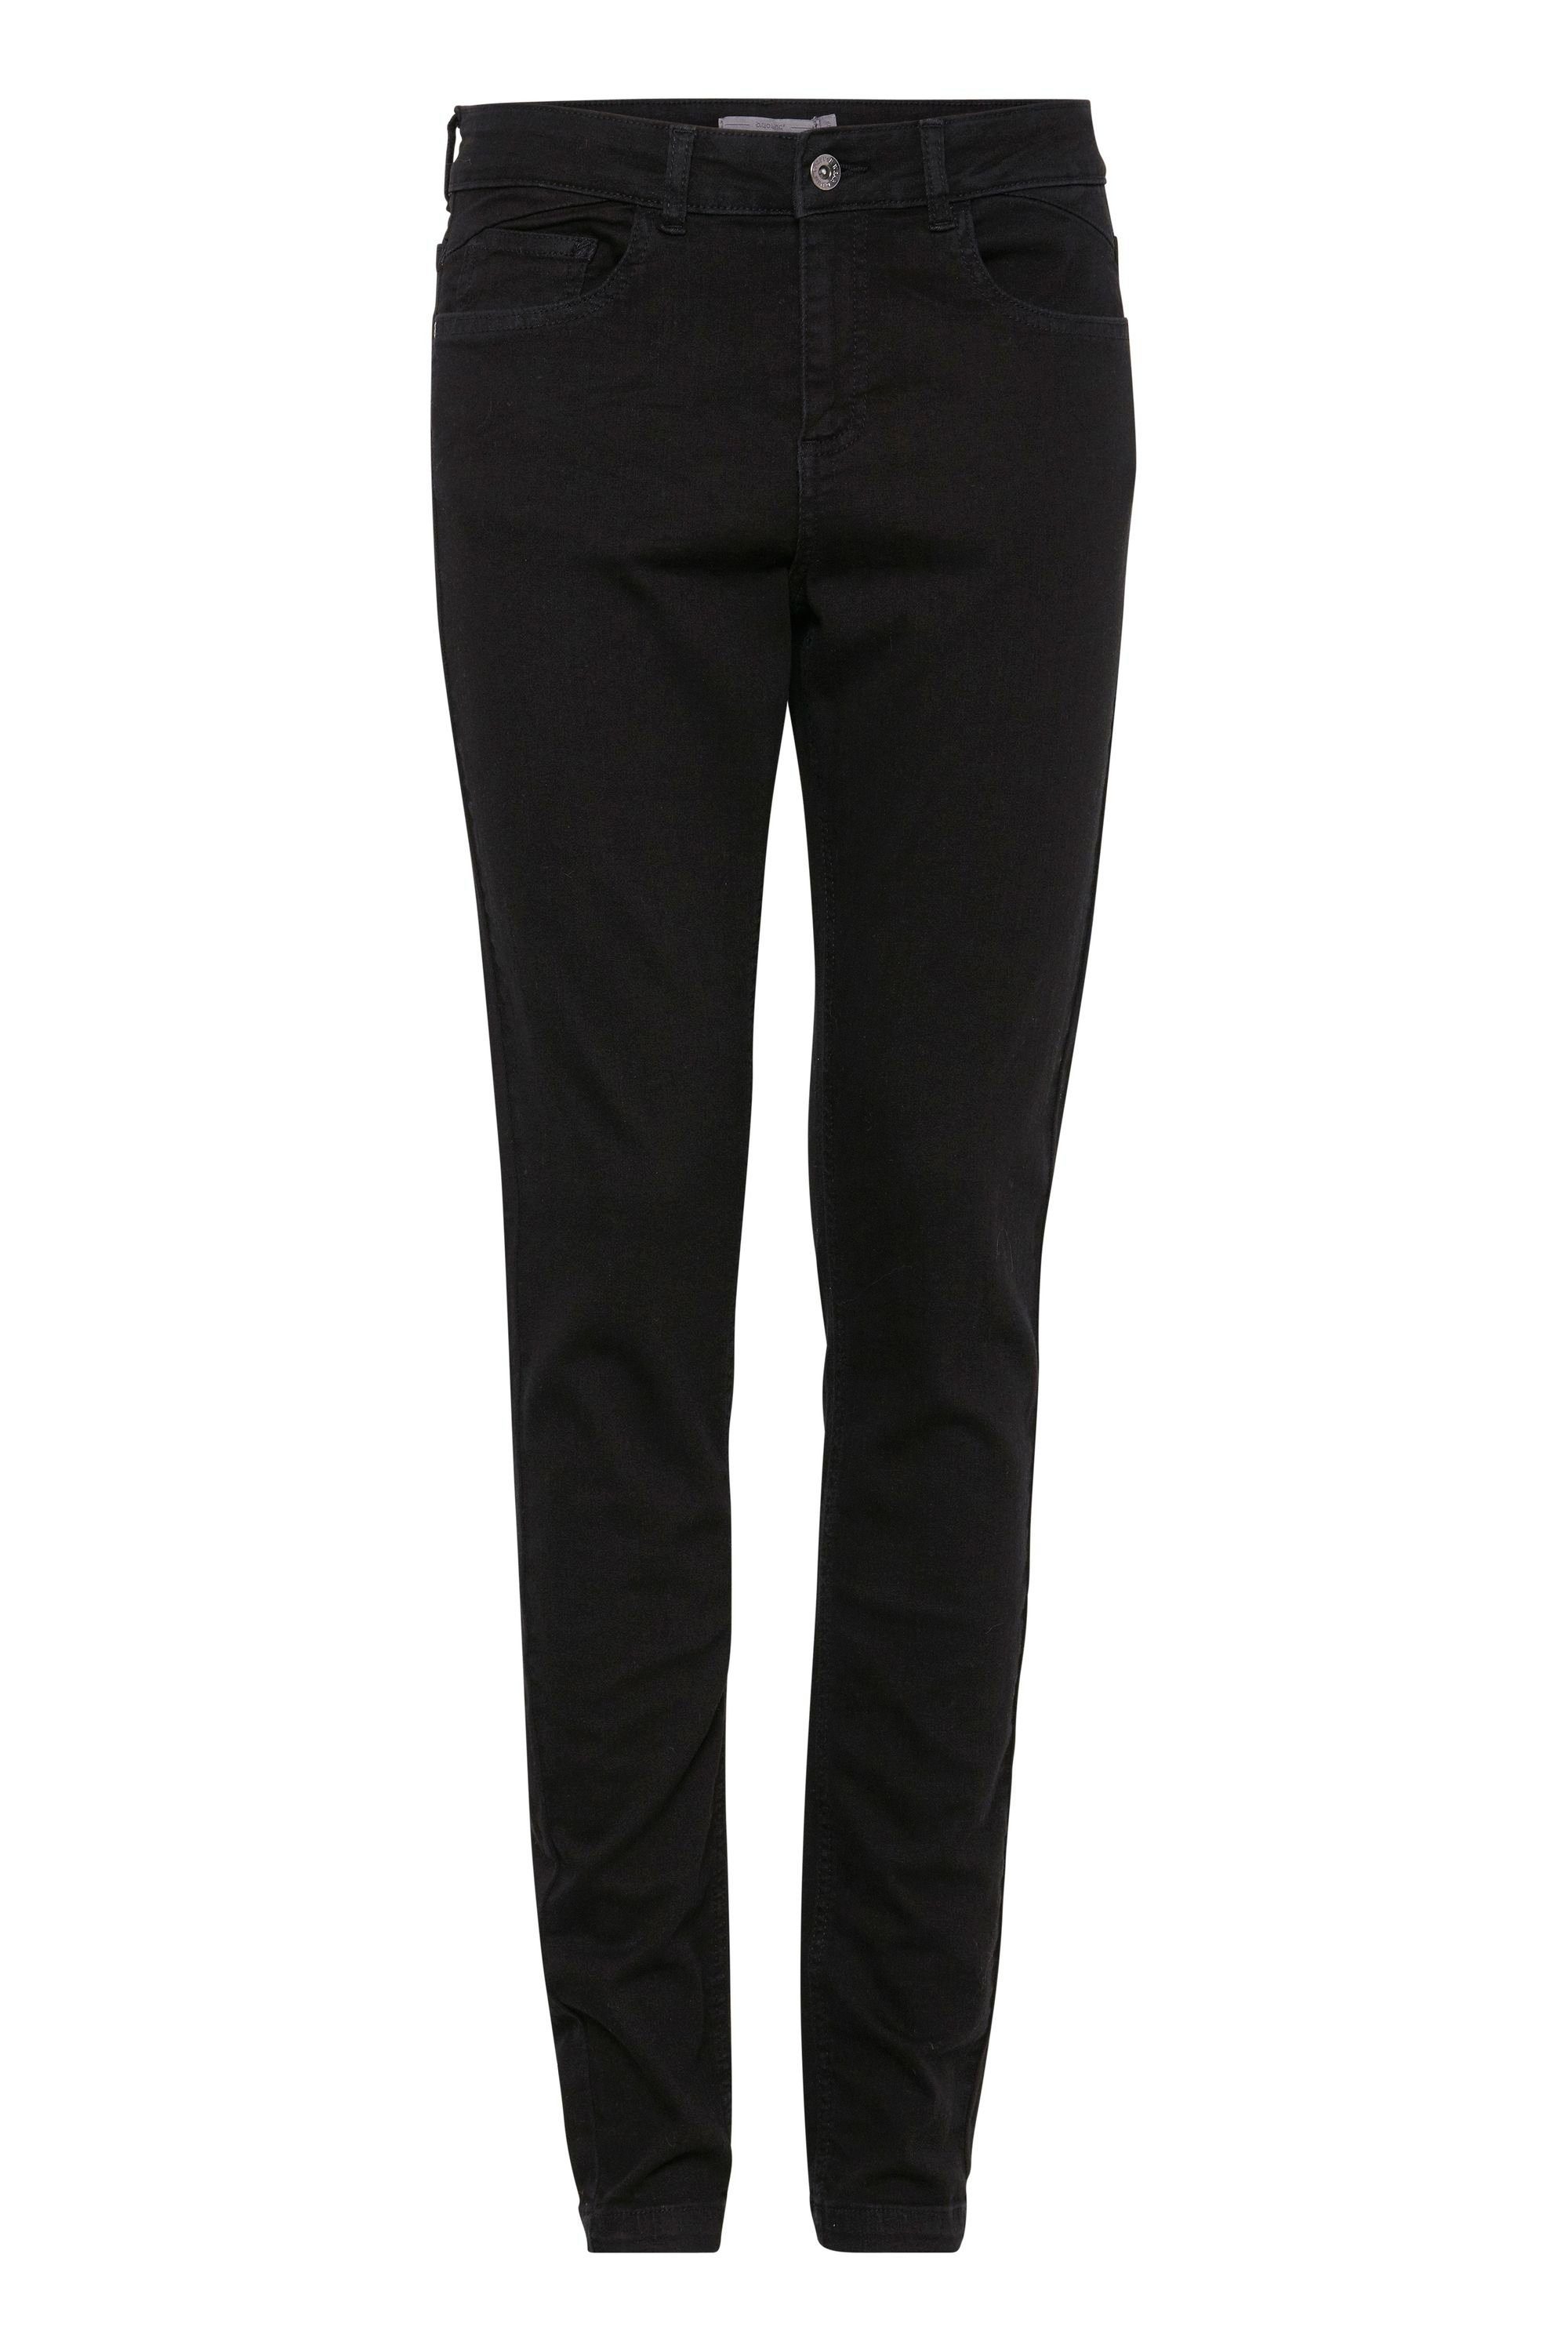 b.young Black jeans (80001) BYLola 20803214 - Skinny-fit-Jeans Luni